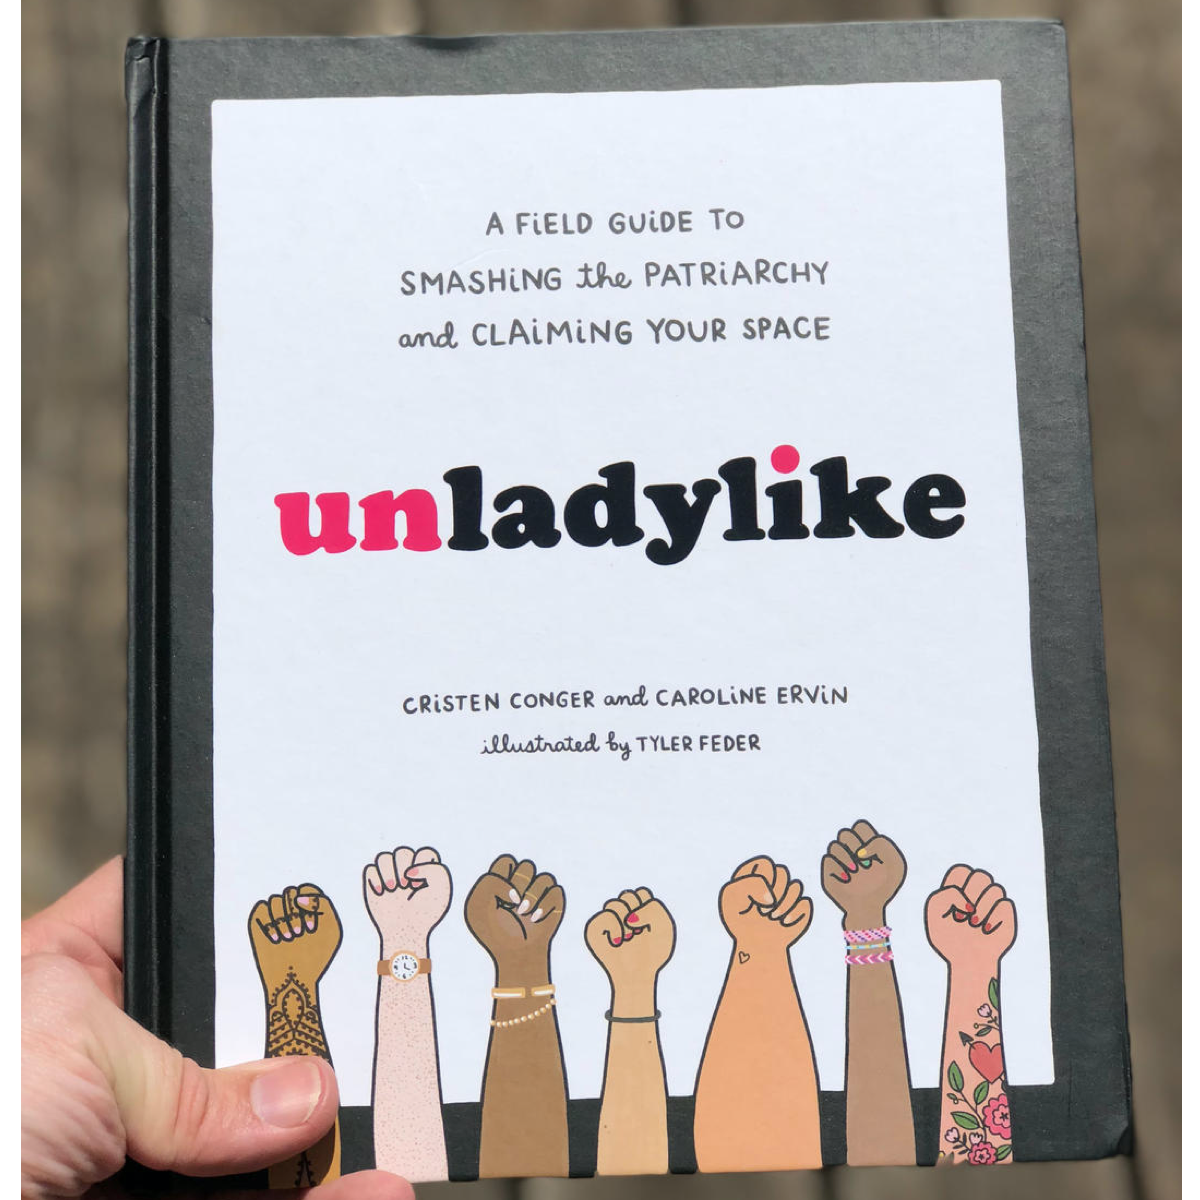 Unladylike: A Field Guide to Smashing the Patriarchy